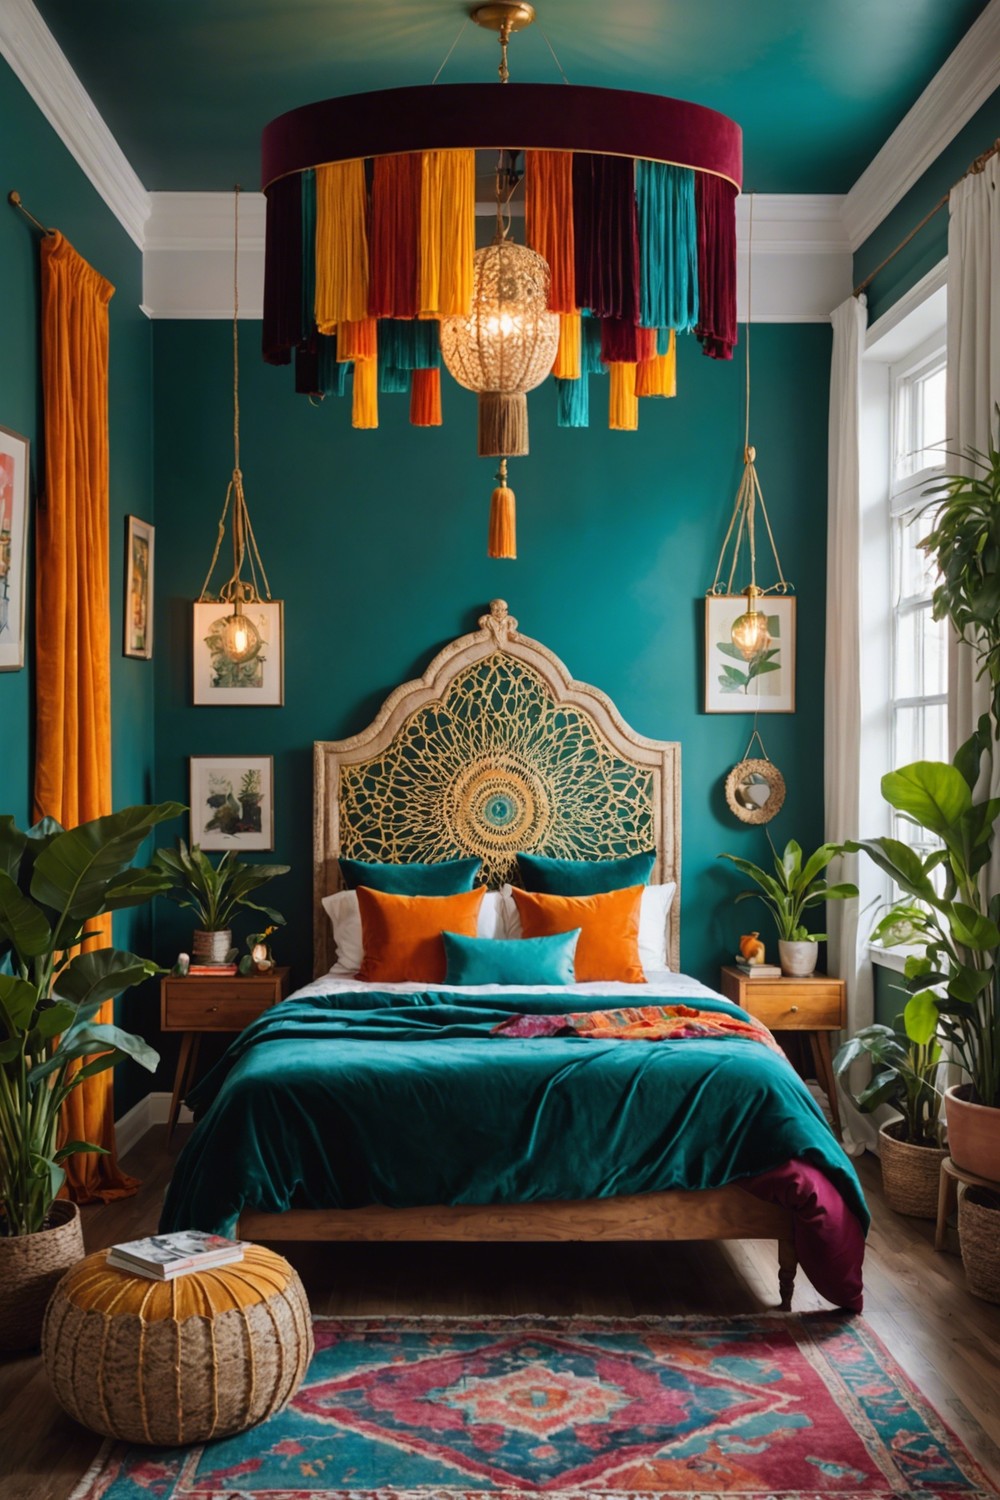 Unconventional Chic: Bohemian Bedroom with Colorful Hanging Lights